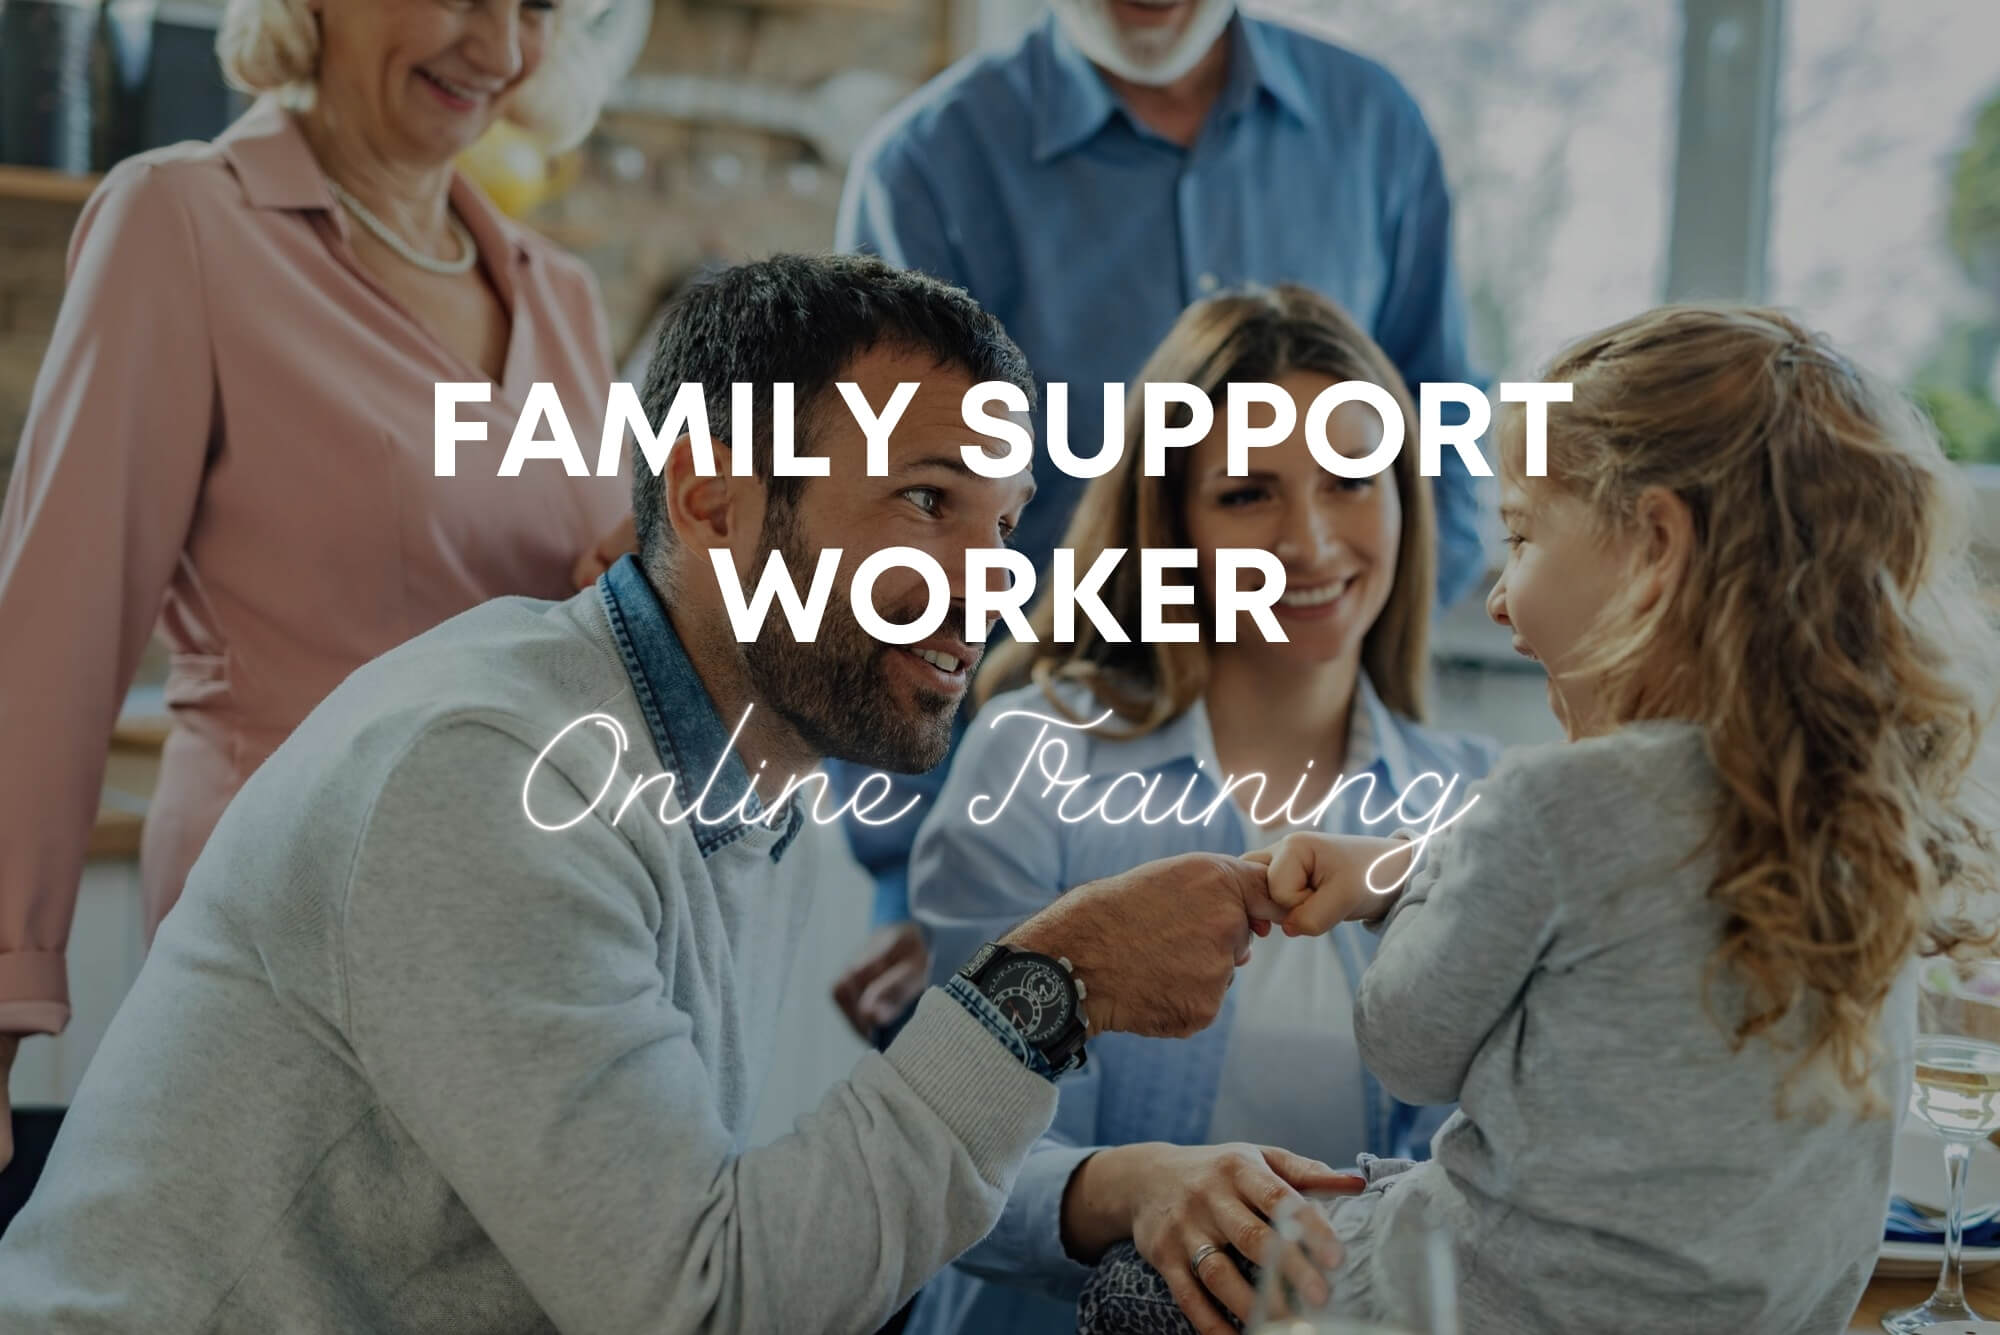 Family Support Worker